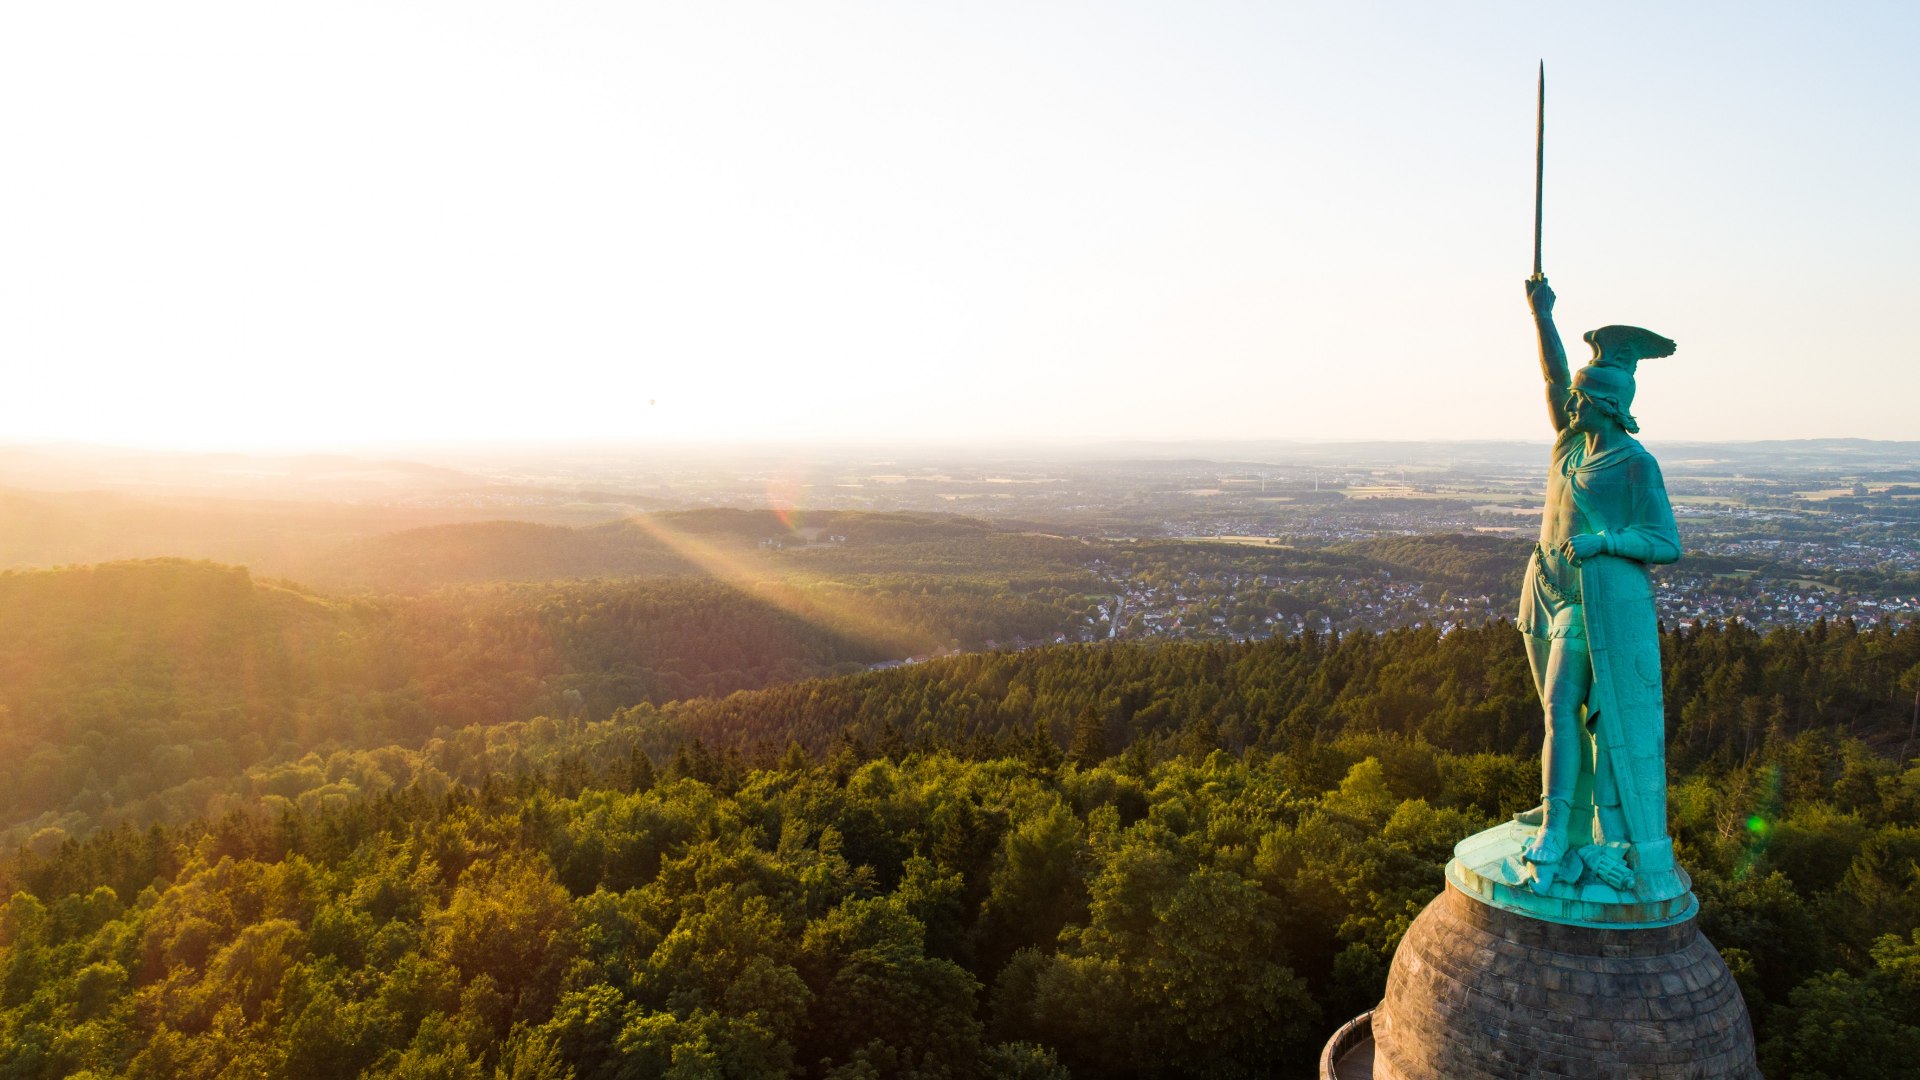 The Hermannsdenkmal is surrounded by the idyllic landscape of the Teutoburger Wald, © Tourismus NRW e.V.